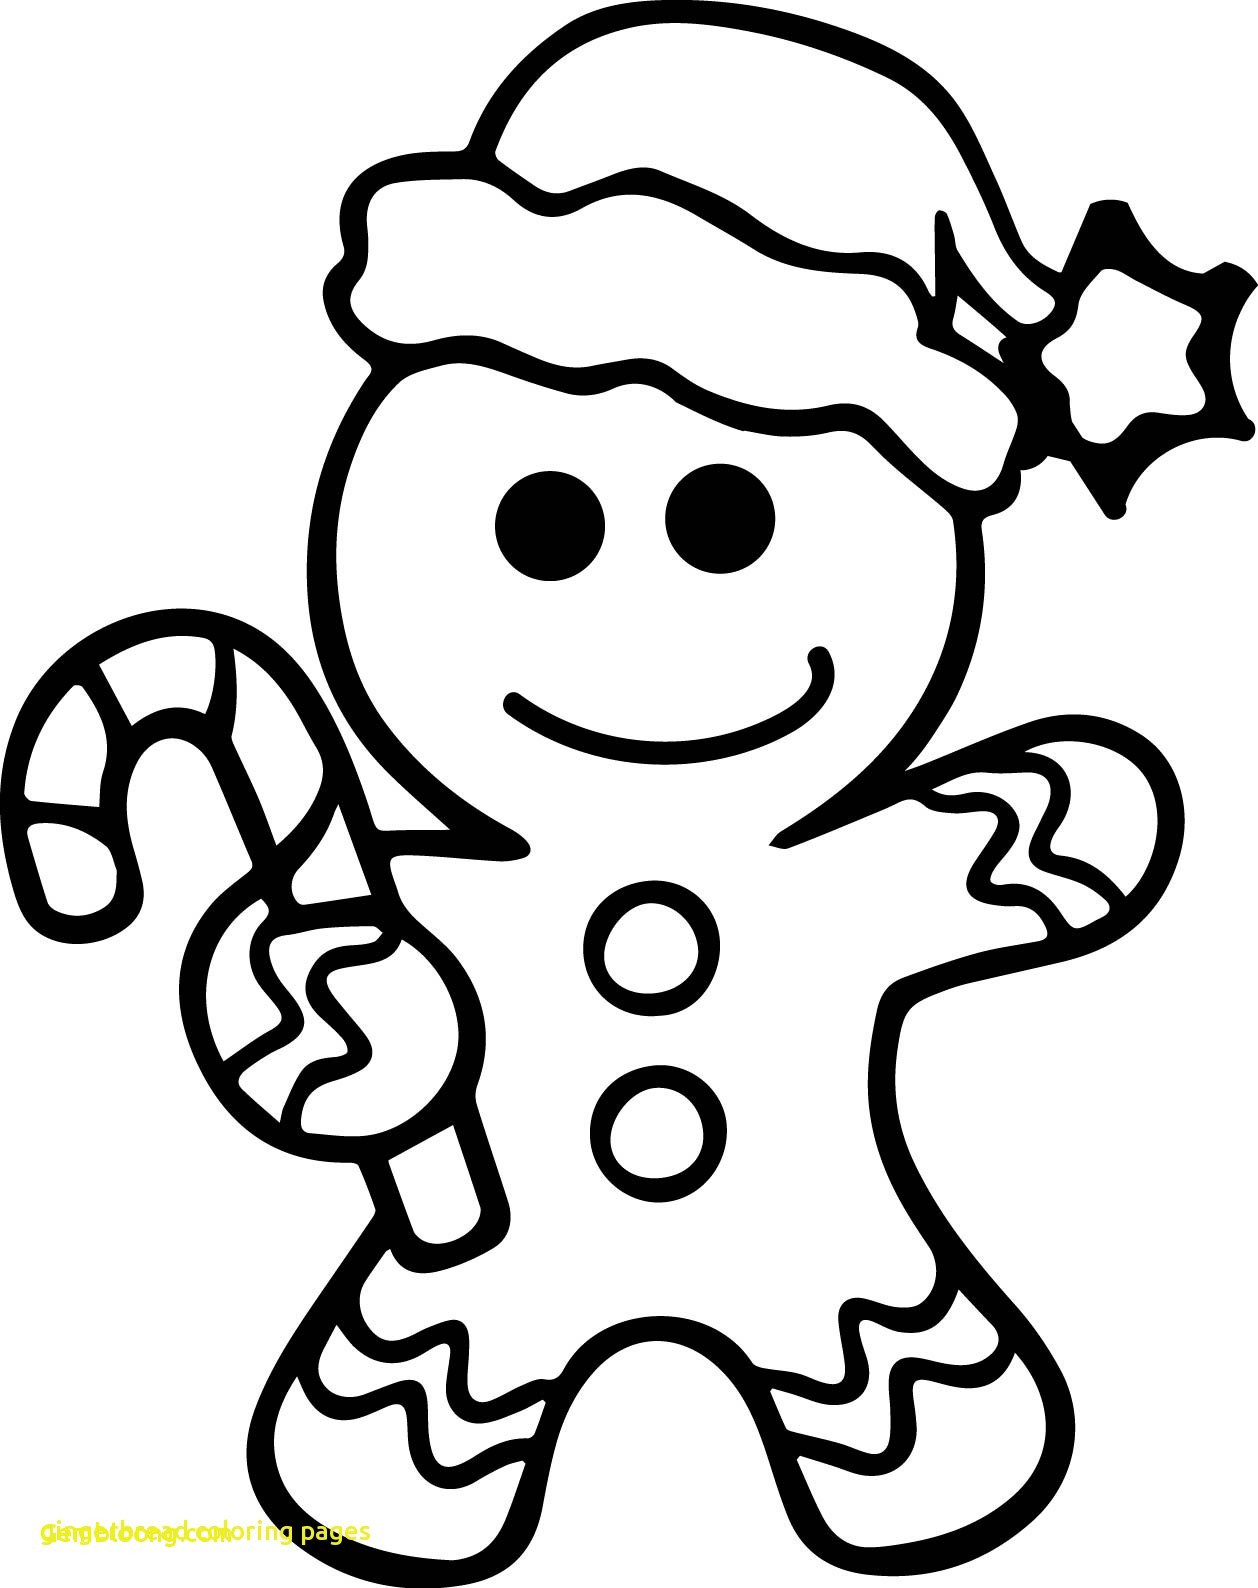 Gingerbread Cookie Coloring Page at GetColorings.com | Free printable